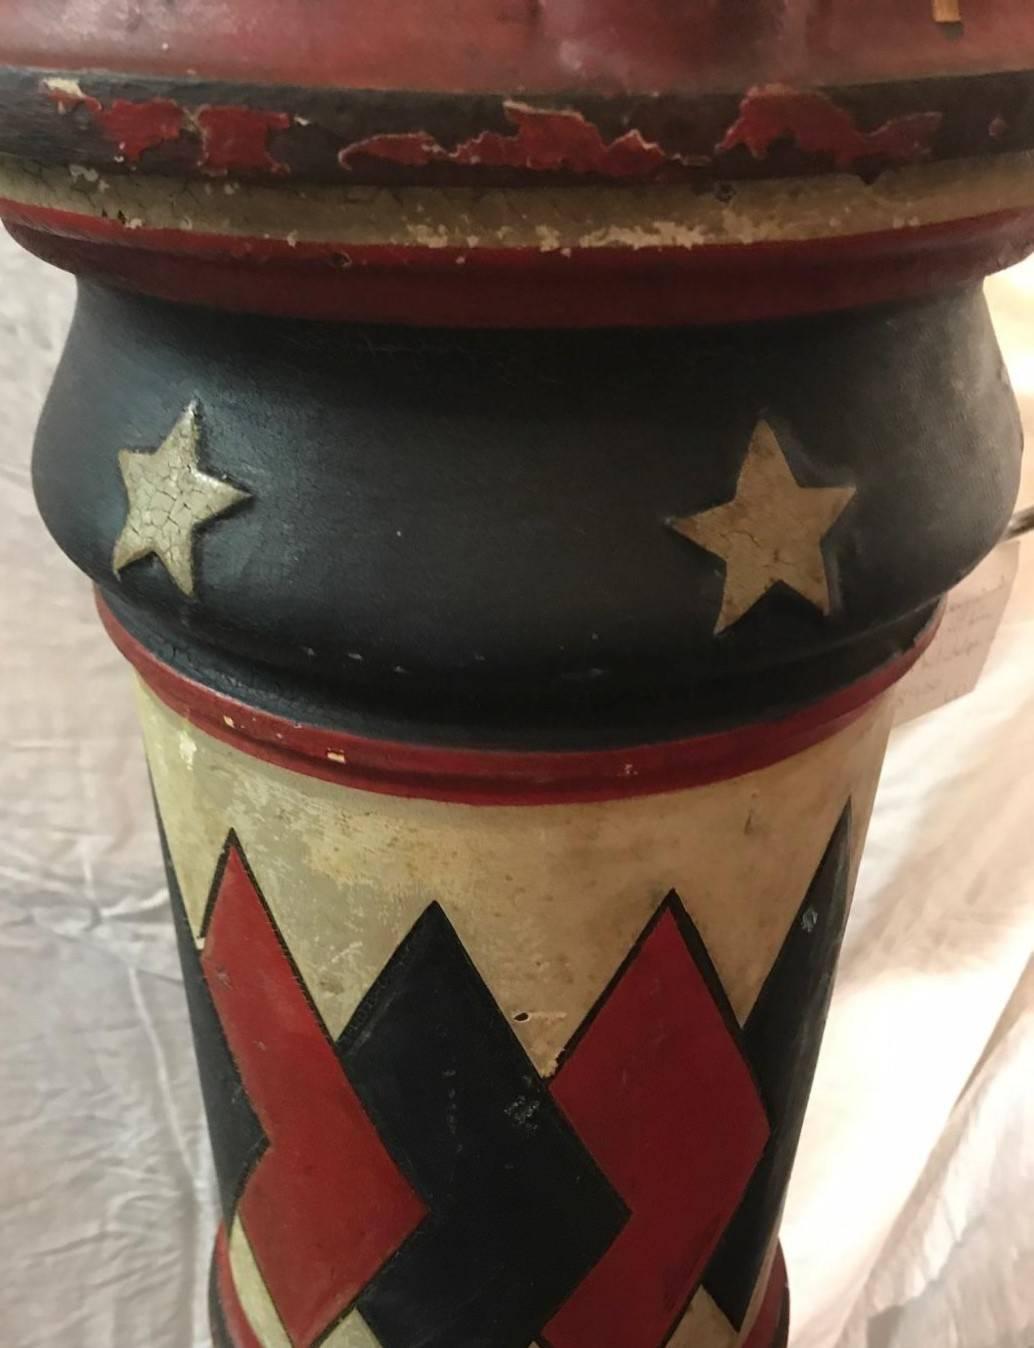 Original James Barker Foundry barber pole. This pole was manufactured in Philadelphia, Pennsylvania to coincide with the American Revolution centennial. This pole is cast iron and was made before porcelain coatings were used. Hallow brass tubes